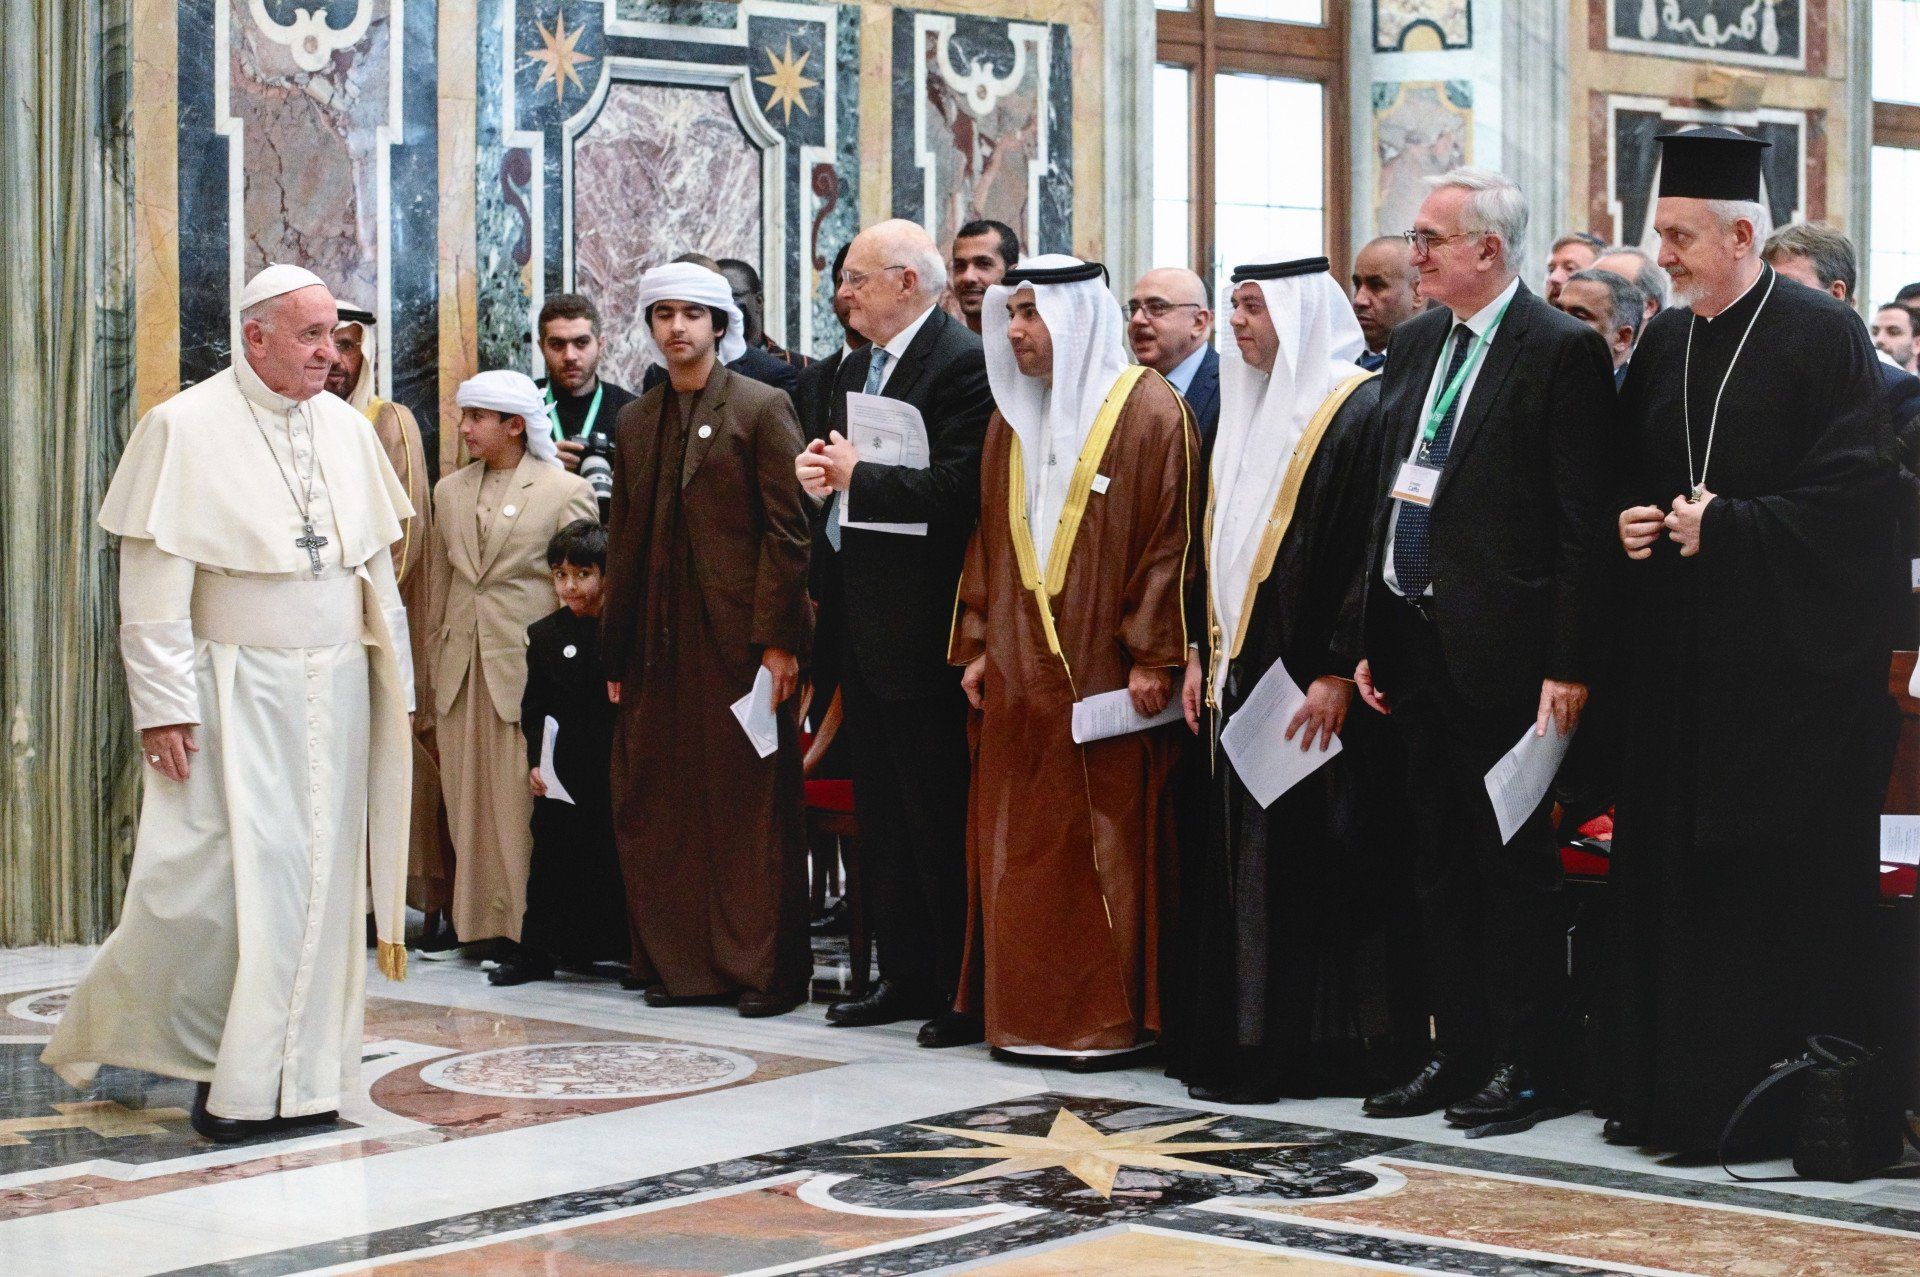 Pope Francis walking in front of a group of men